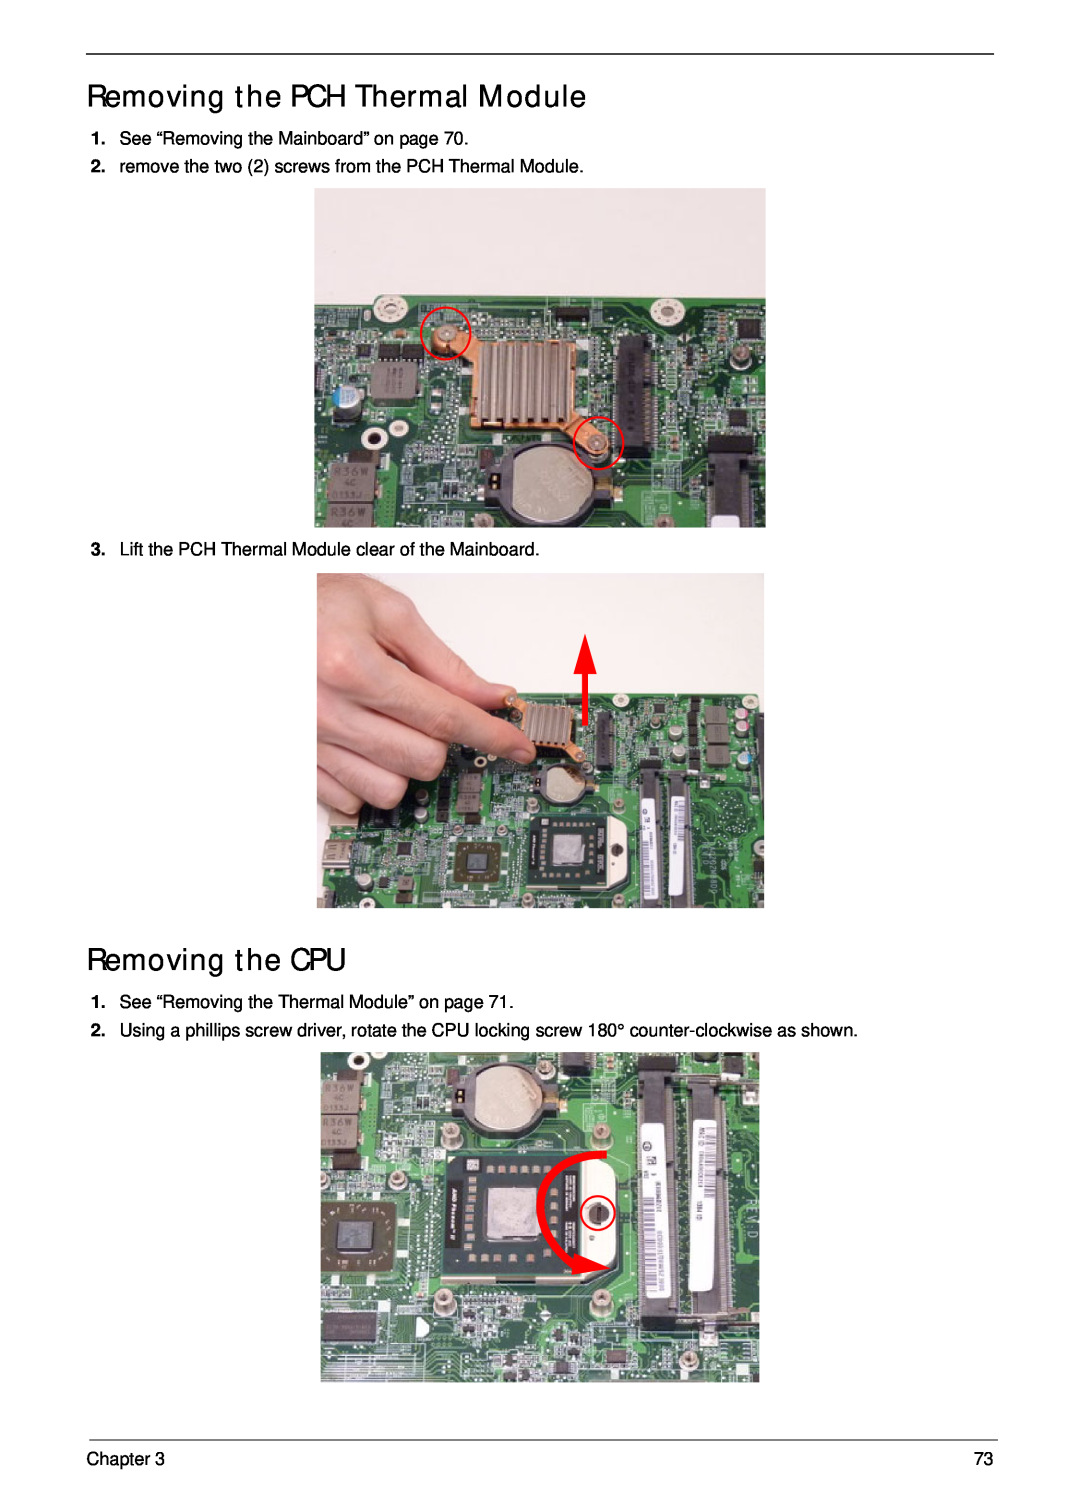 Aspire Digital 4625 manual Removing the PCH Thermal Module, Removing the CPU, See “Removing the Mainboard” on page, Chapter 